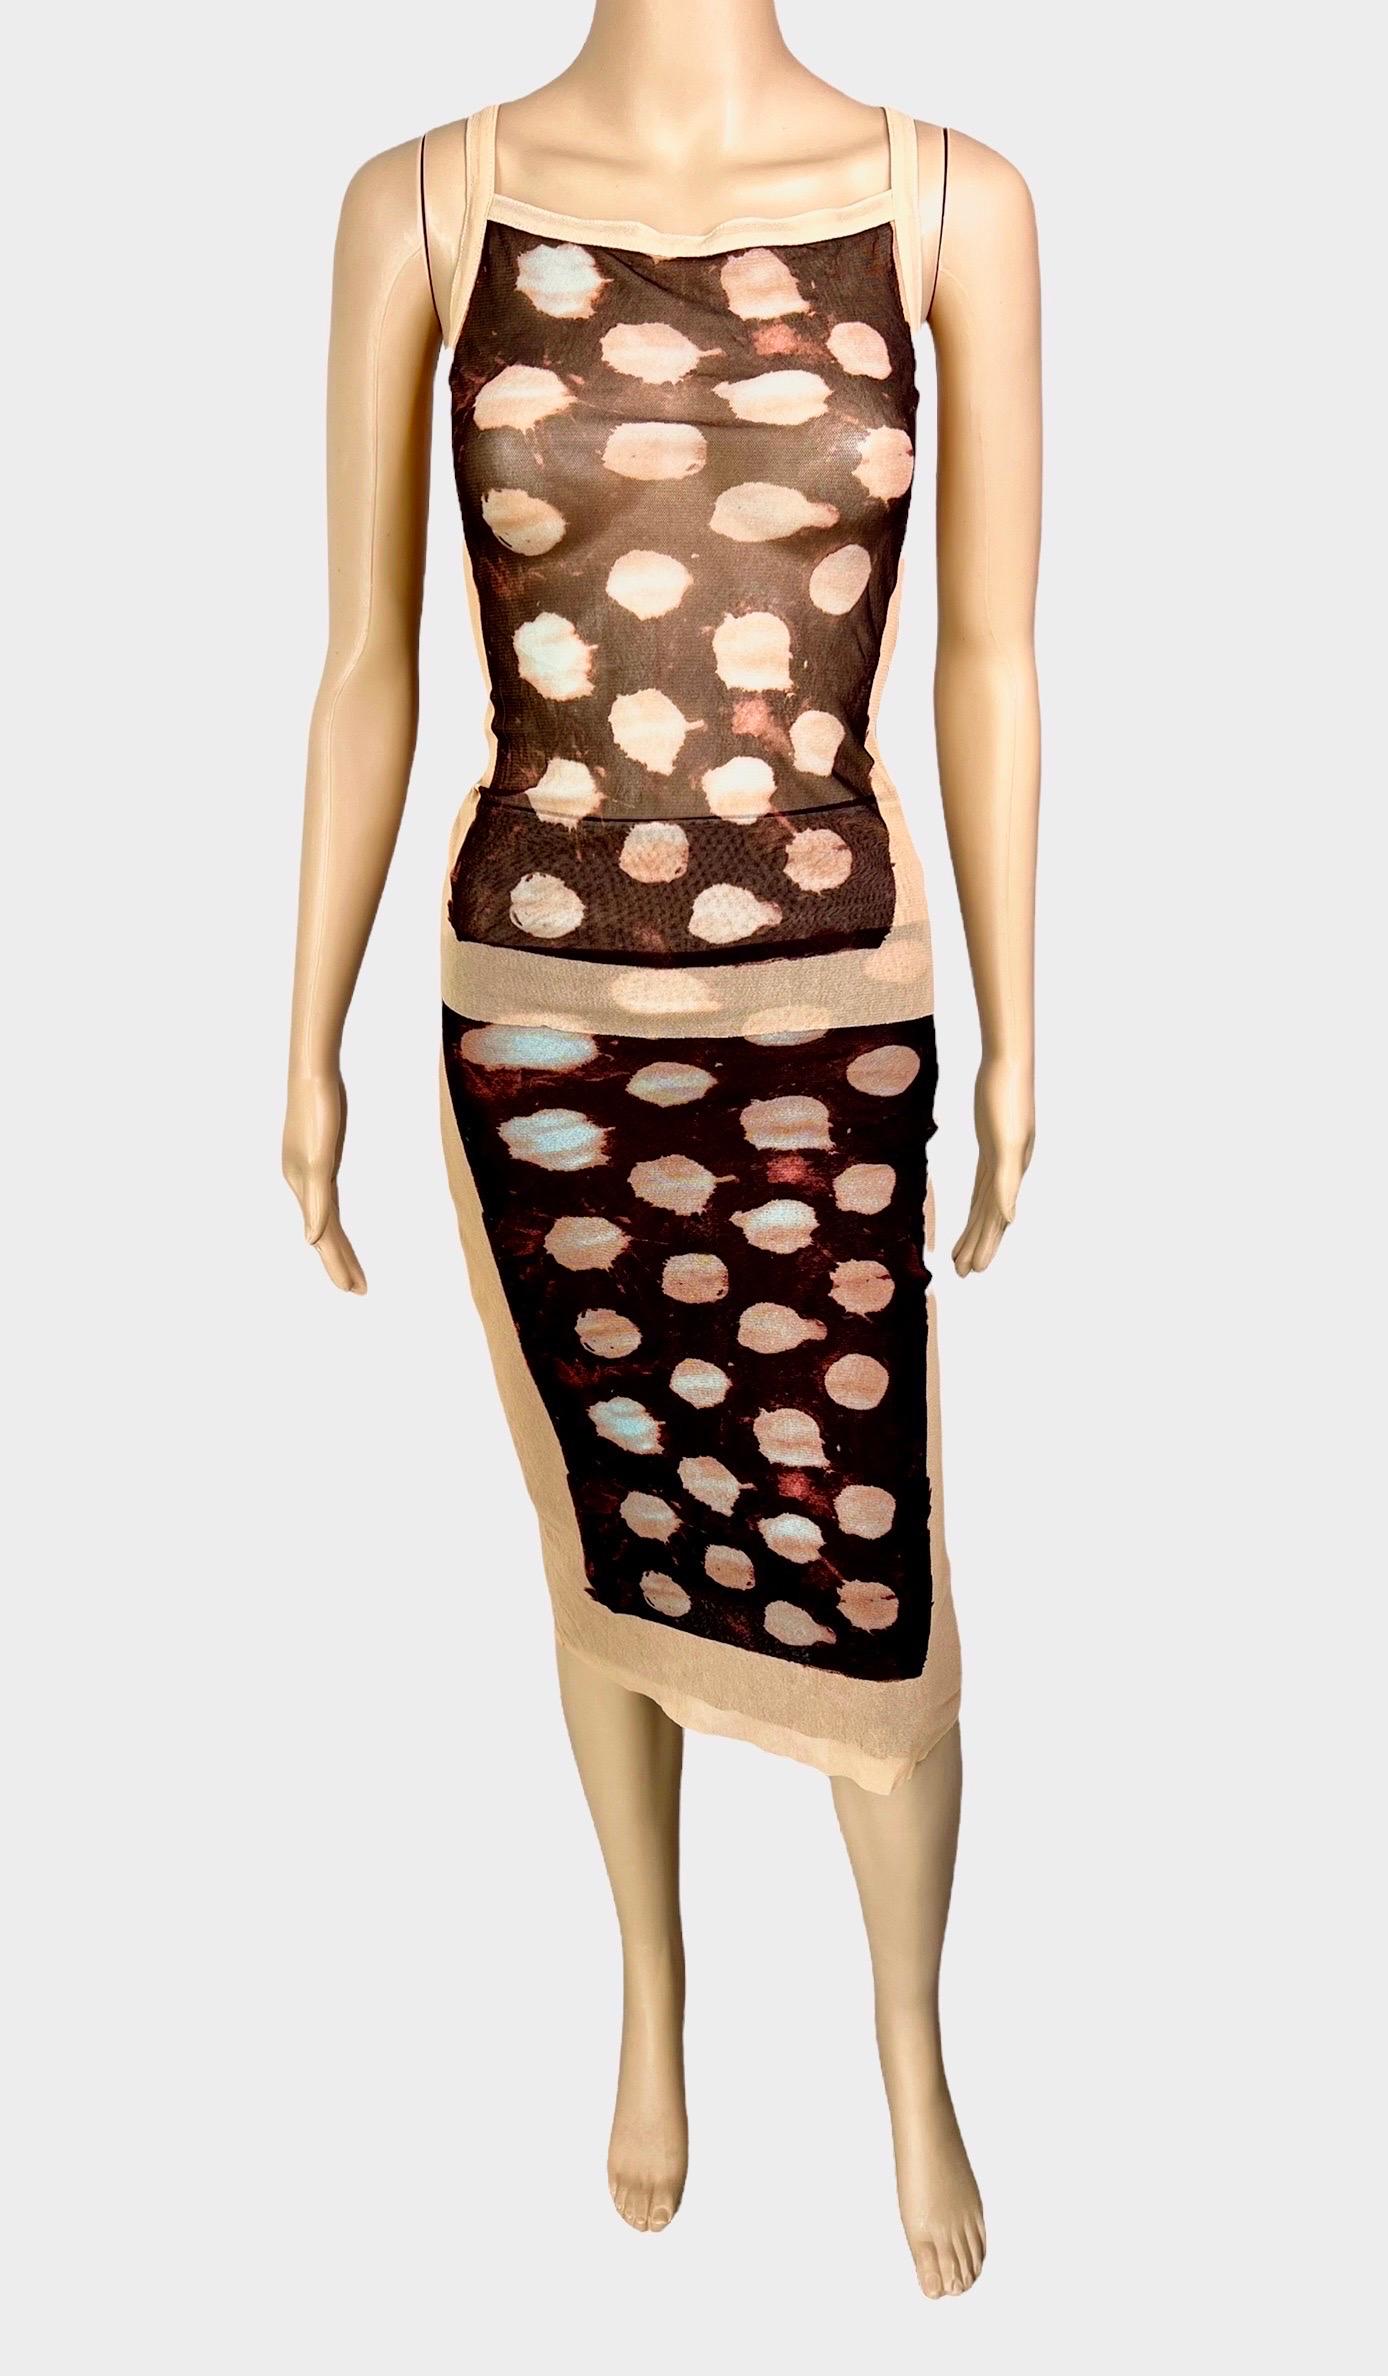 Jean Paul Gaultier S/S 2001 Sheer Polka Dot Cardigan Top and Skirt 3 Piece Set For Sale 2